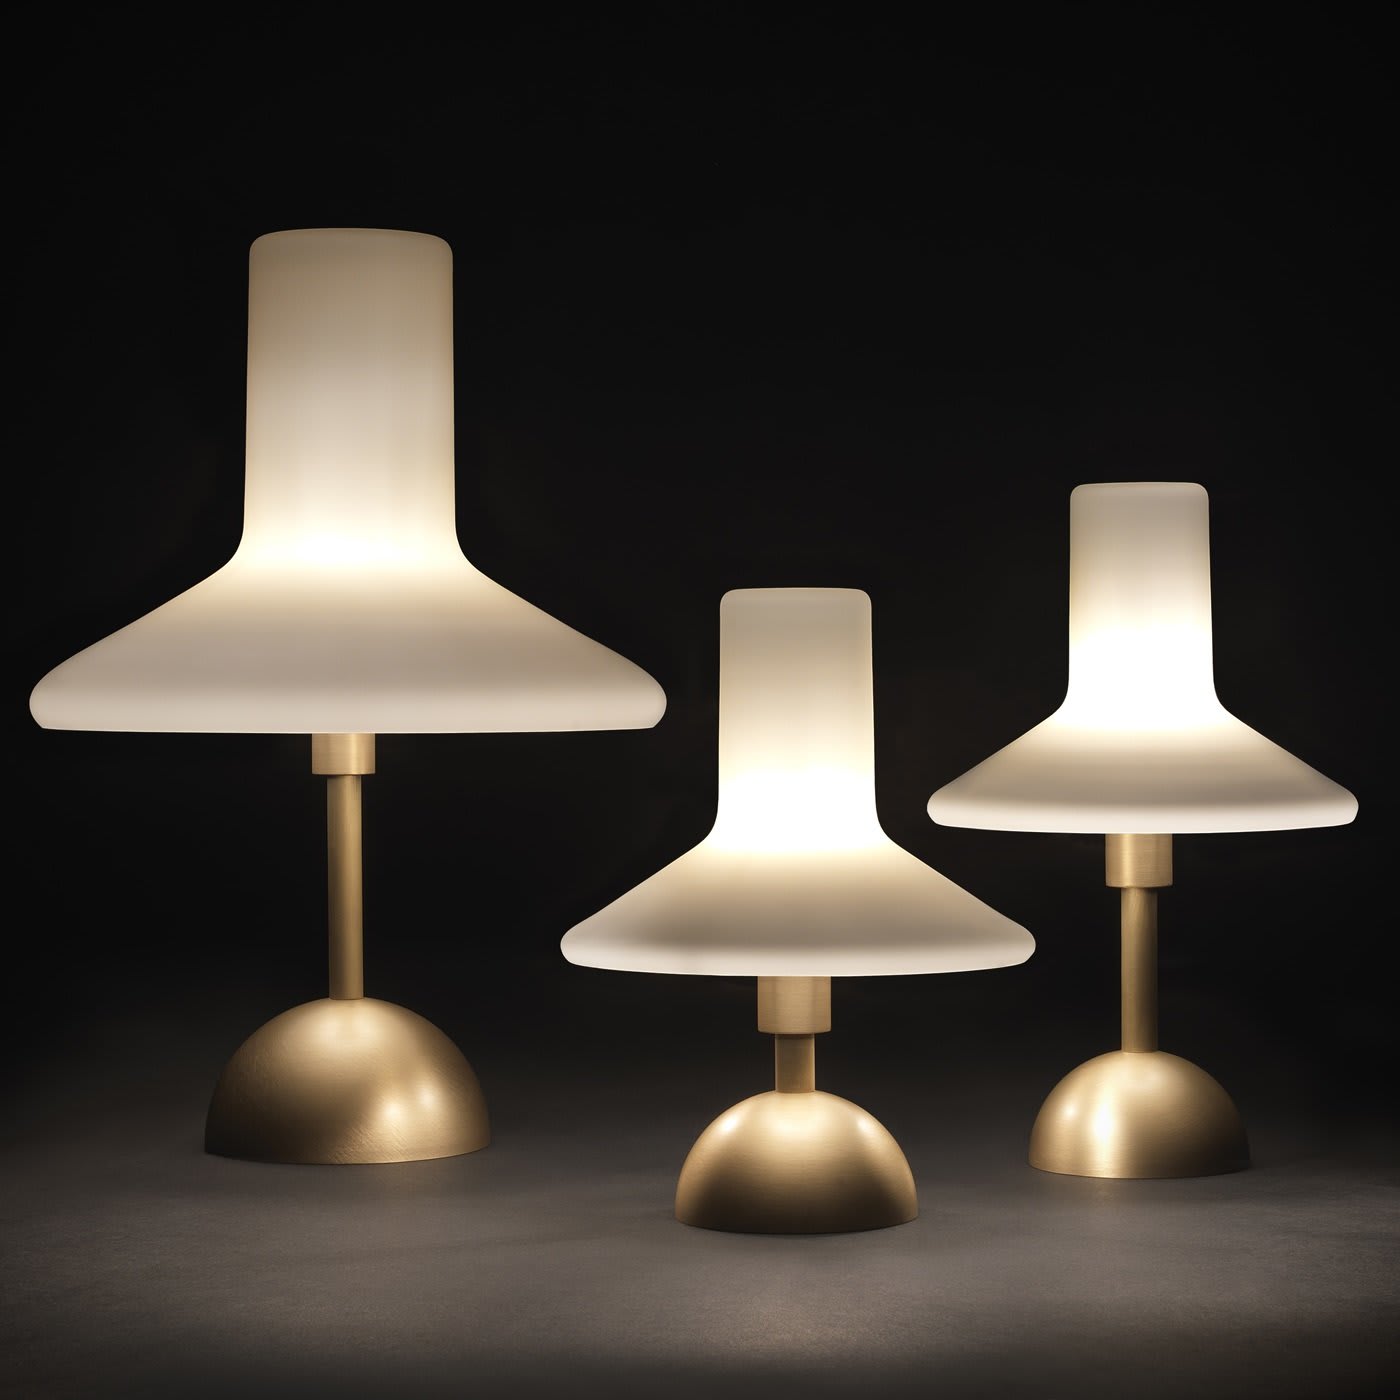 Olly Brass Large Table Lamp - Tato